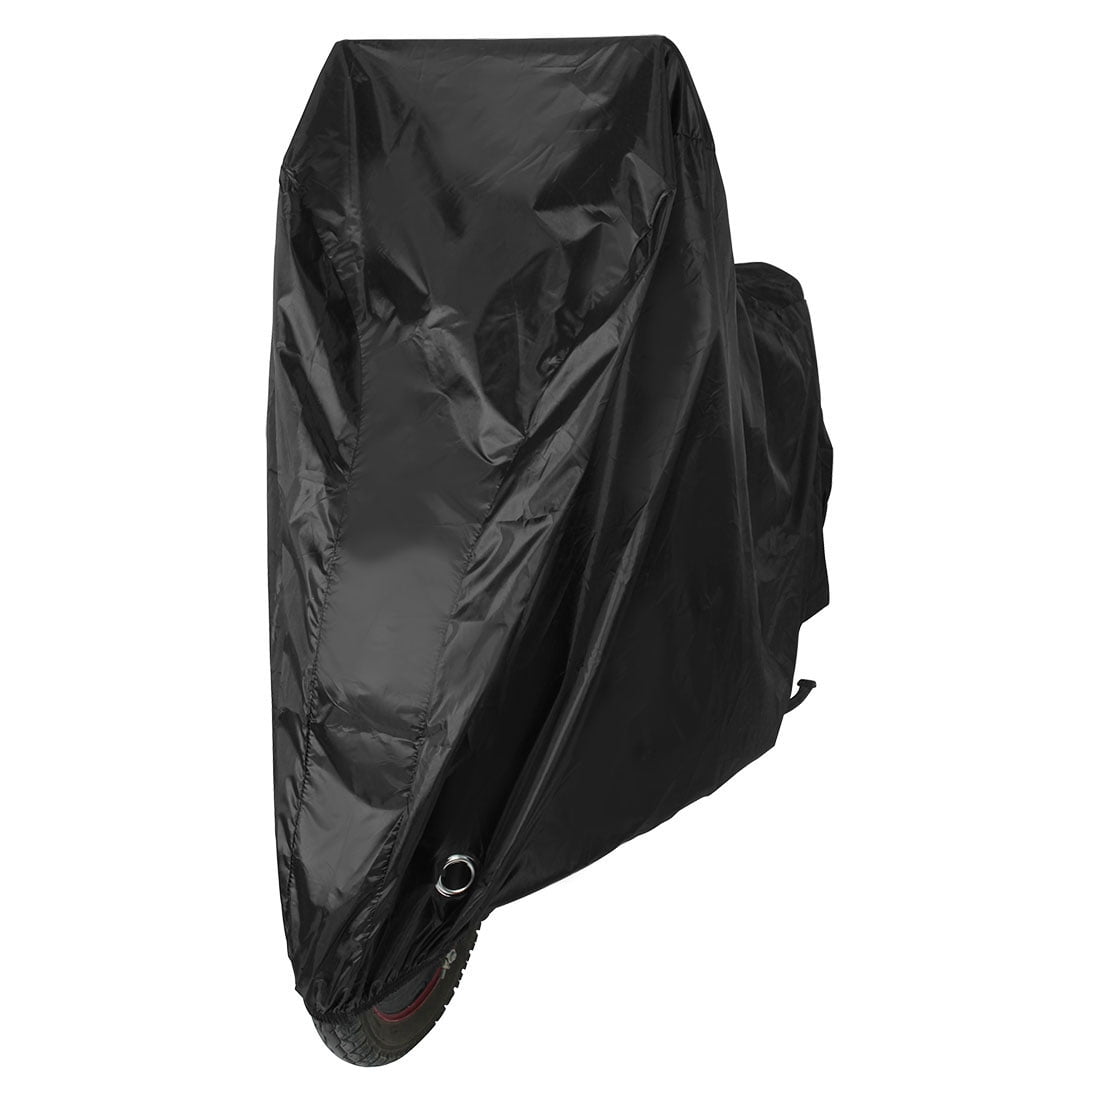 Waterproof Bicycle Cycling Rain Cover Dust Garage Outdoor Scooter Protector HGUK 